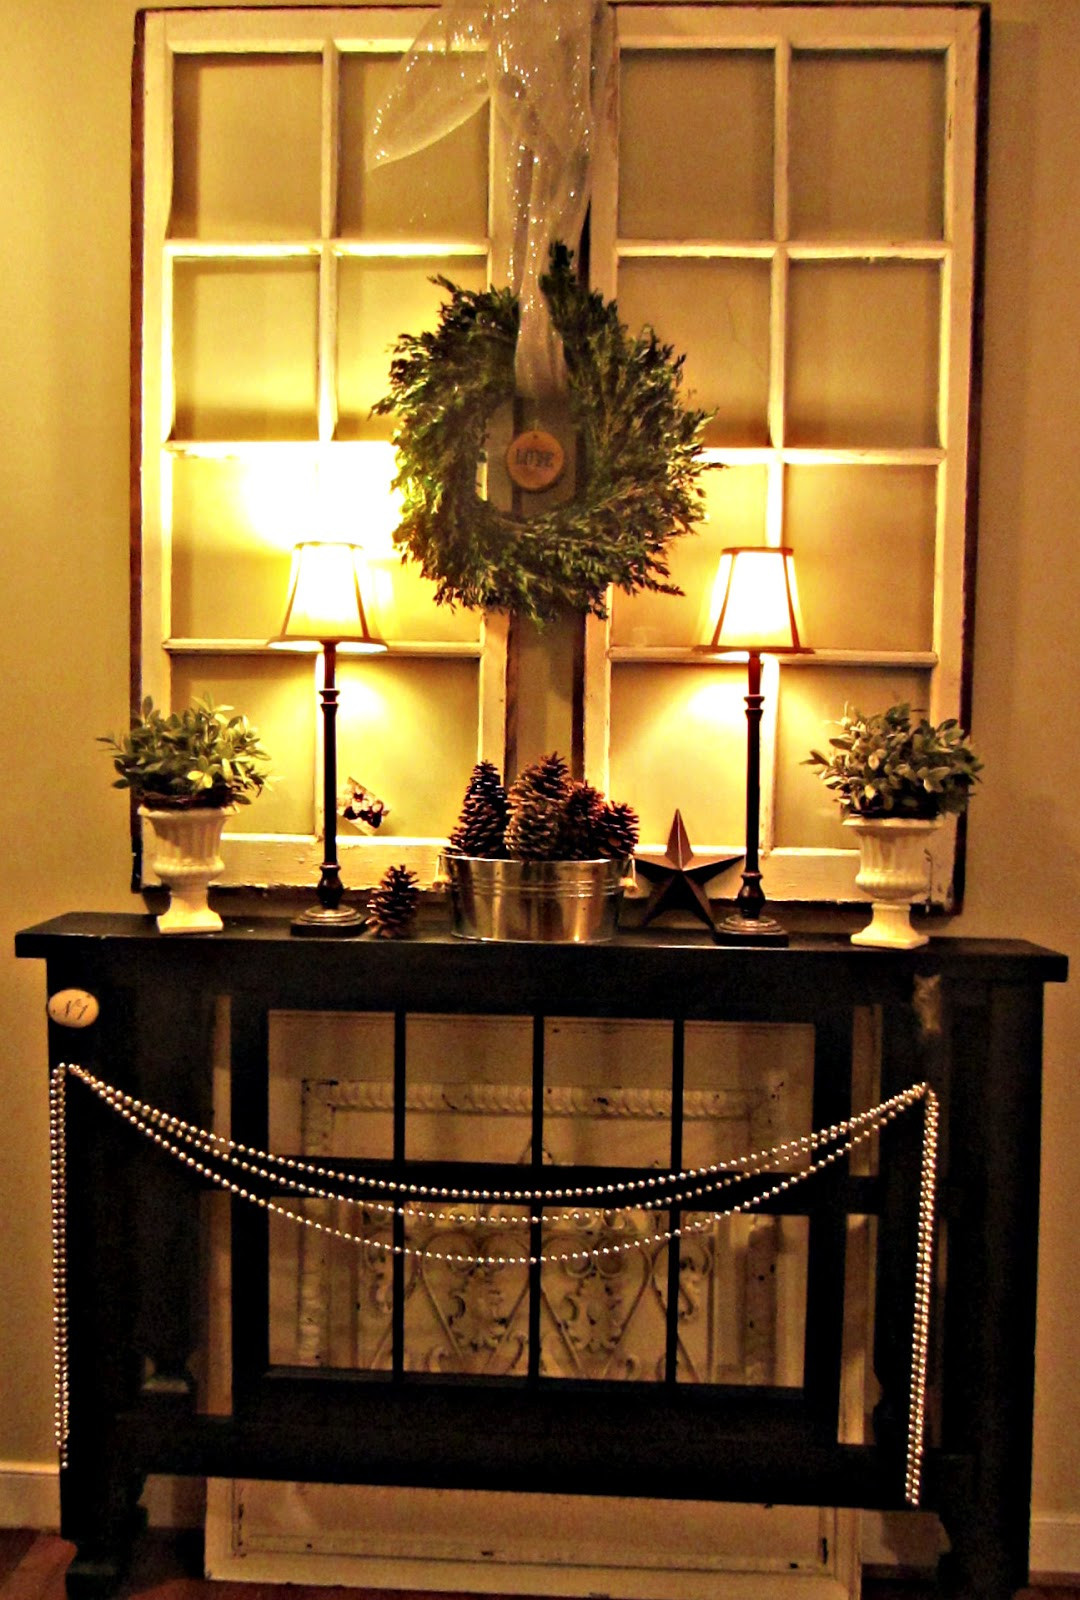 Christmas Foyer Decorating Ideas
 Down to Earth Style Foyer Christmas Mantel